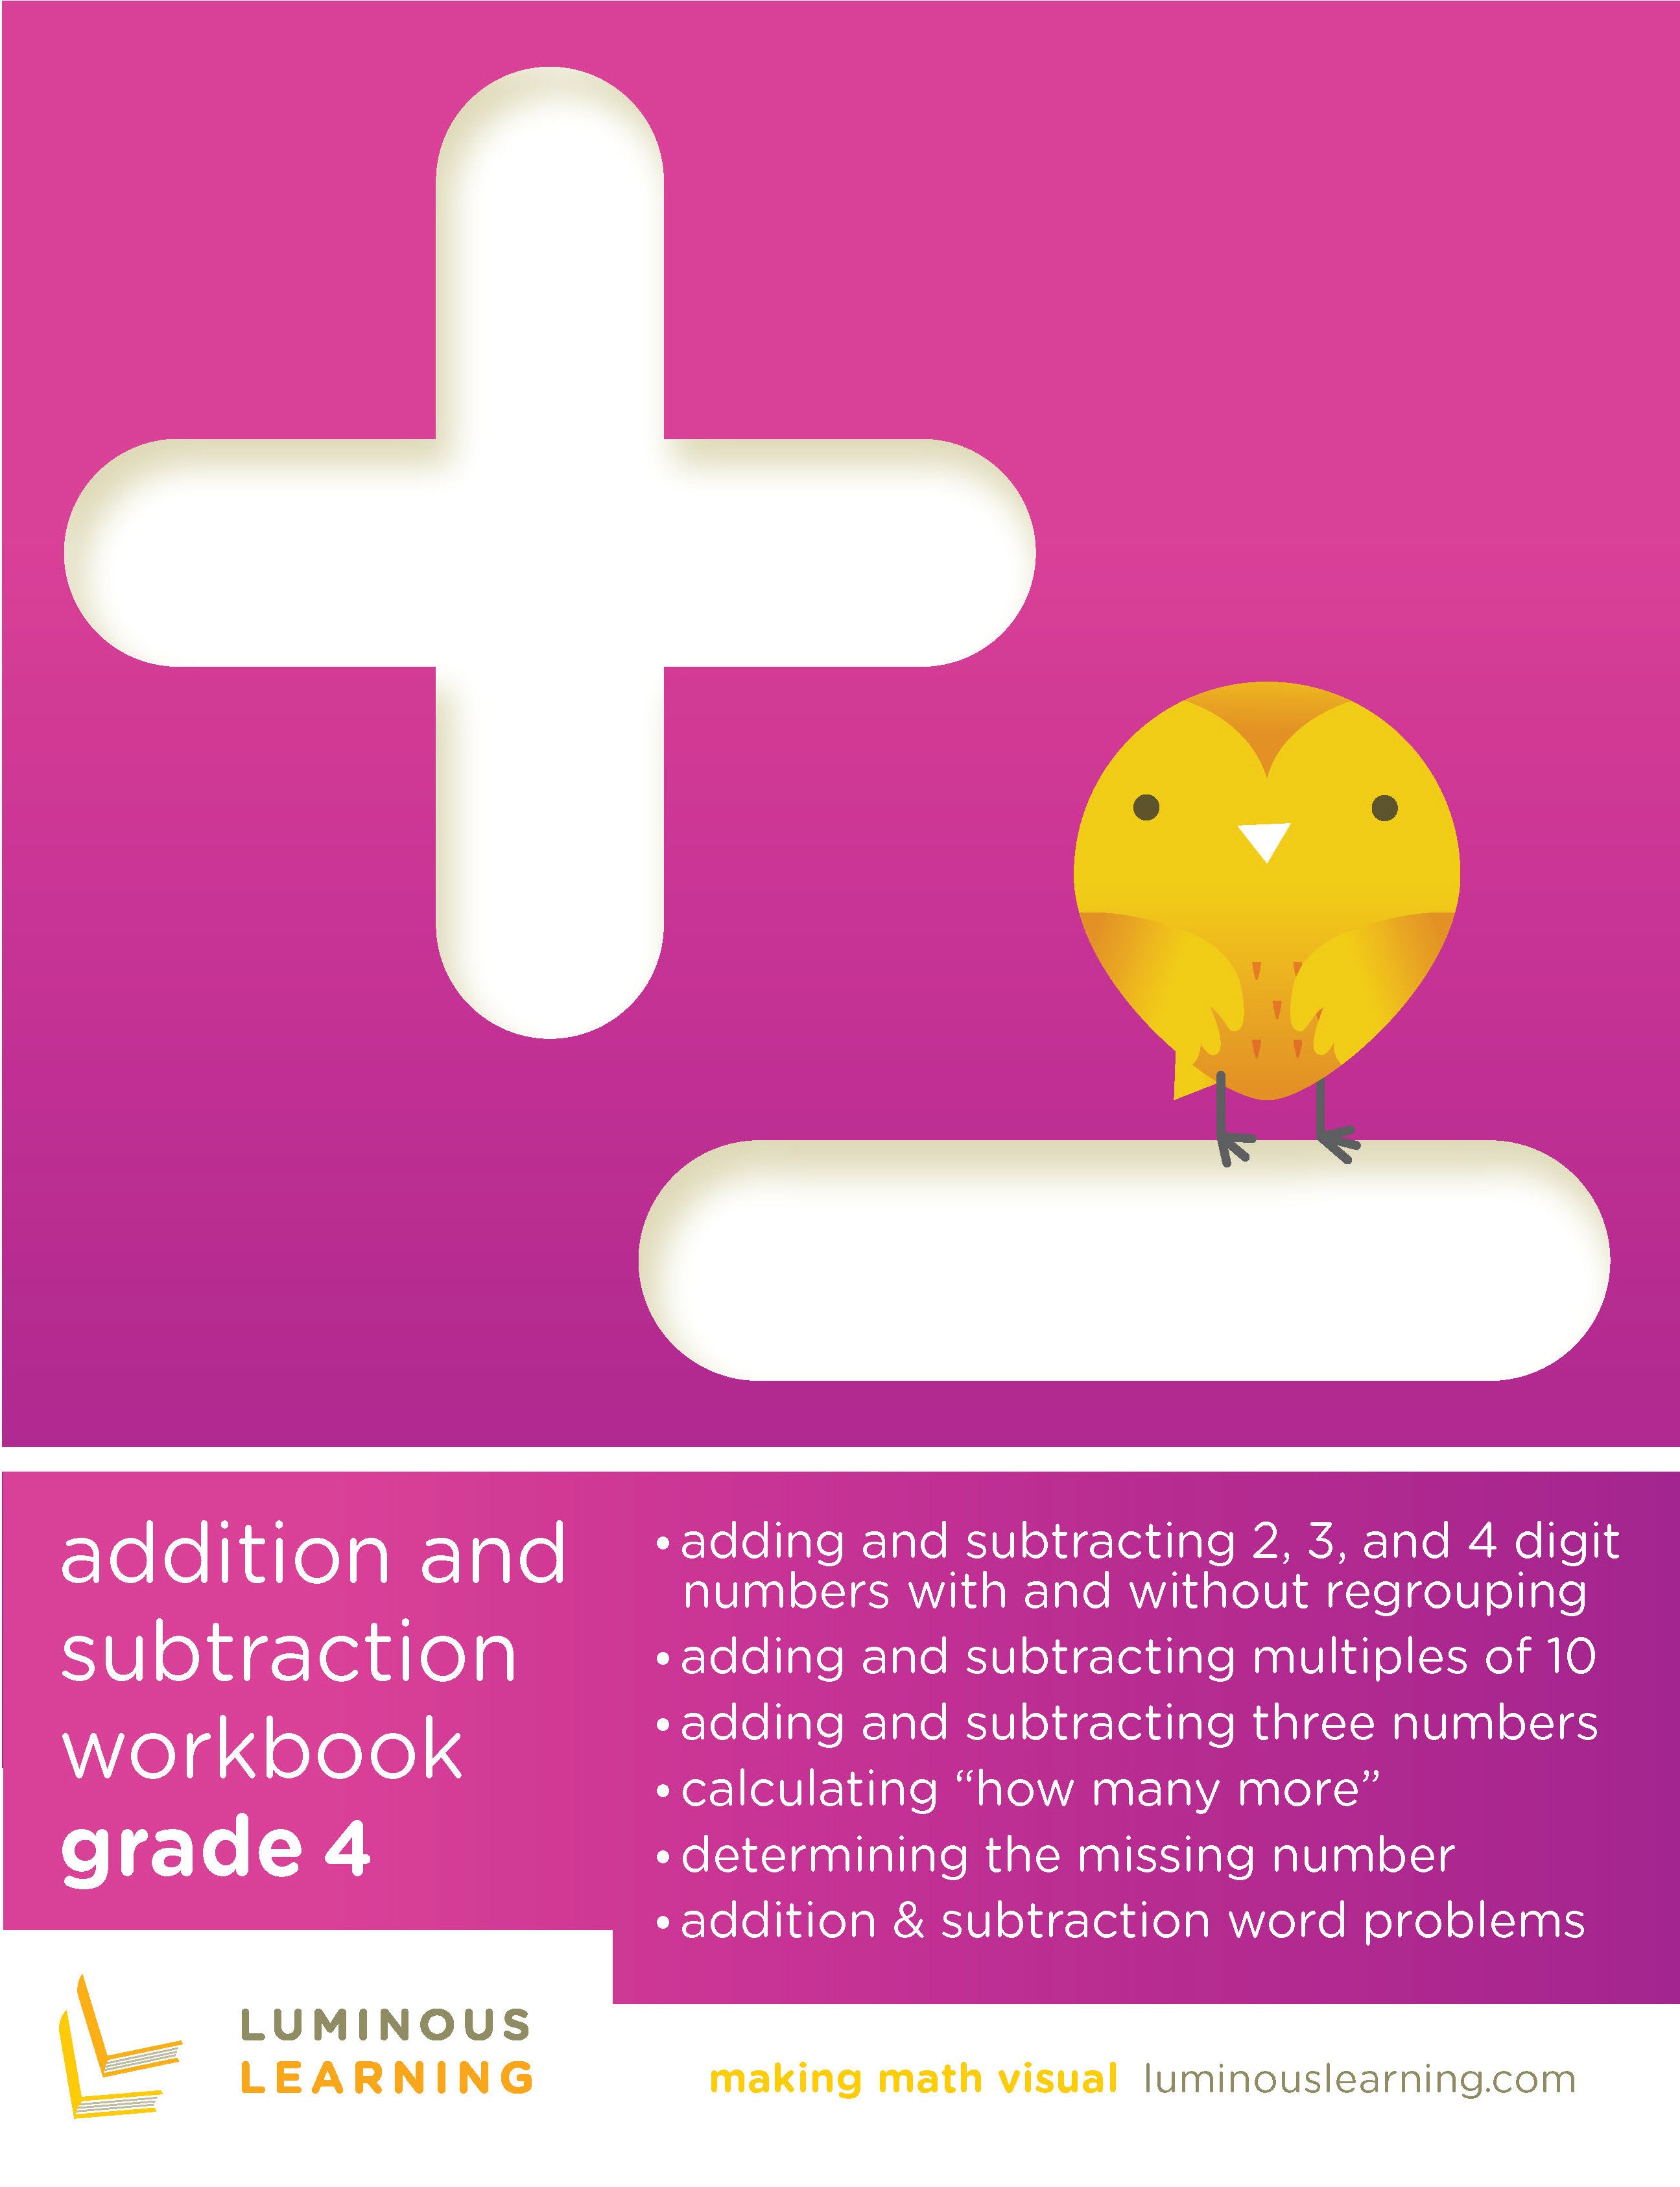 grade-4-addition-and-subtraction-workbook